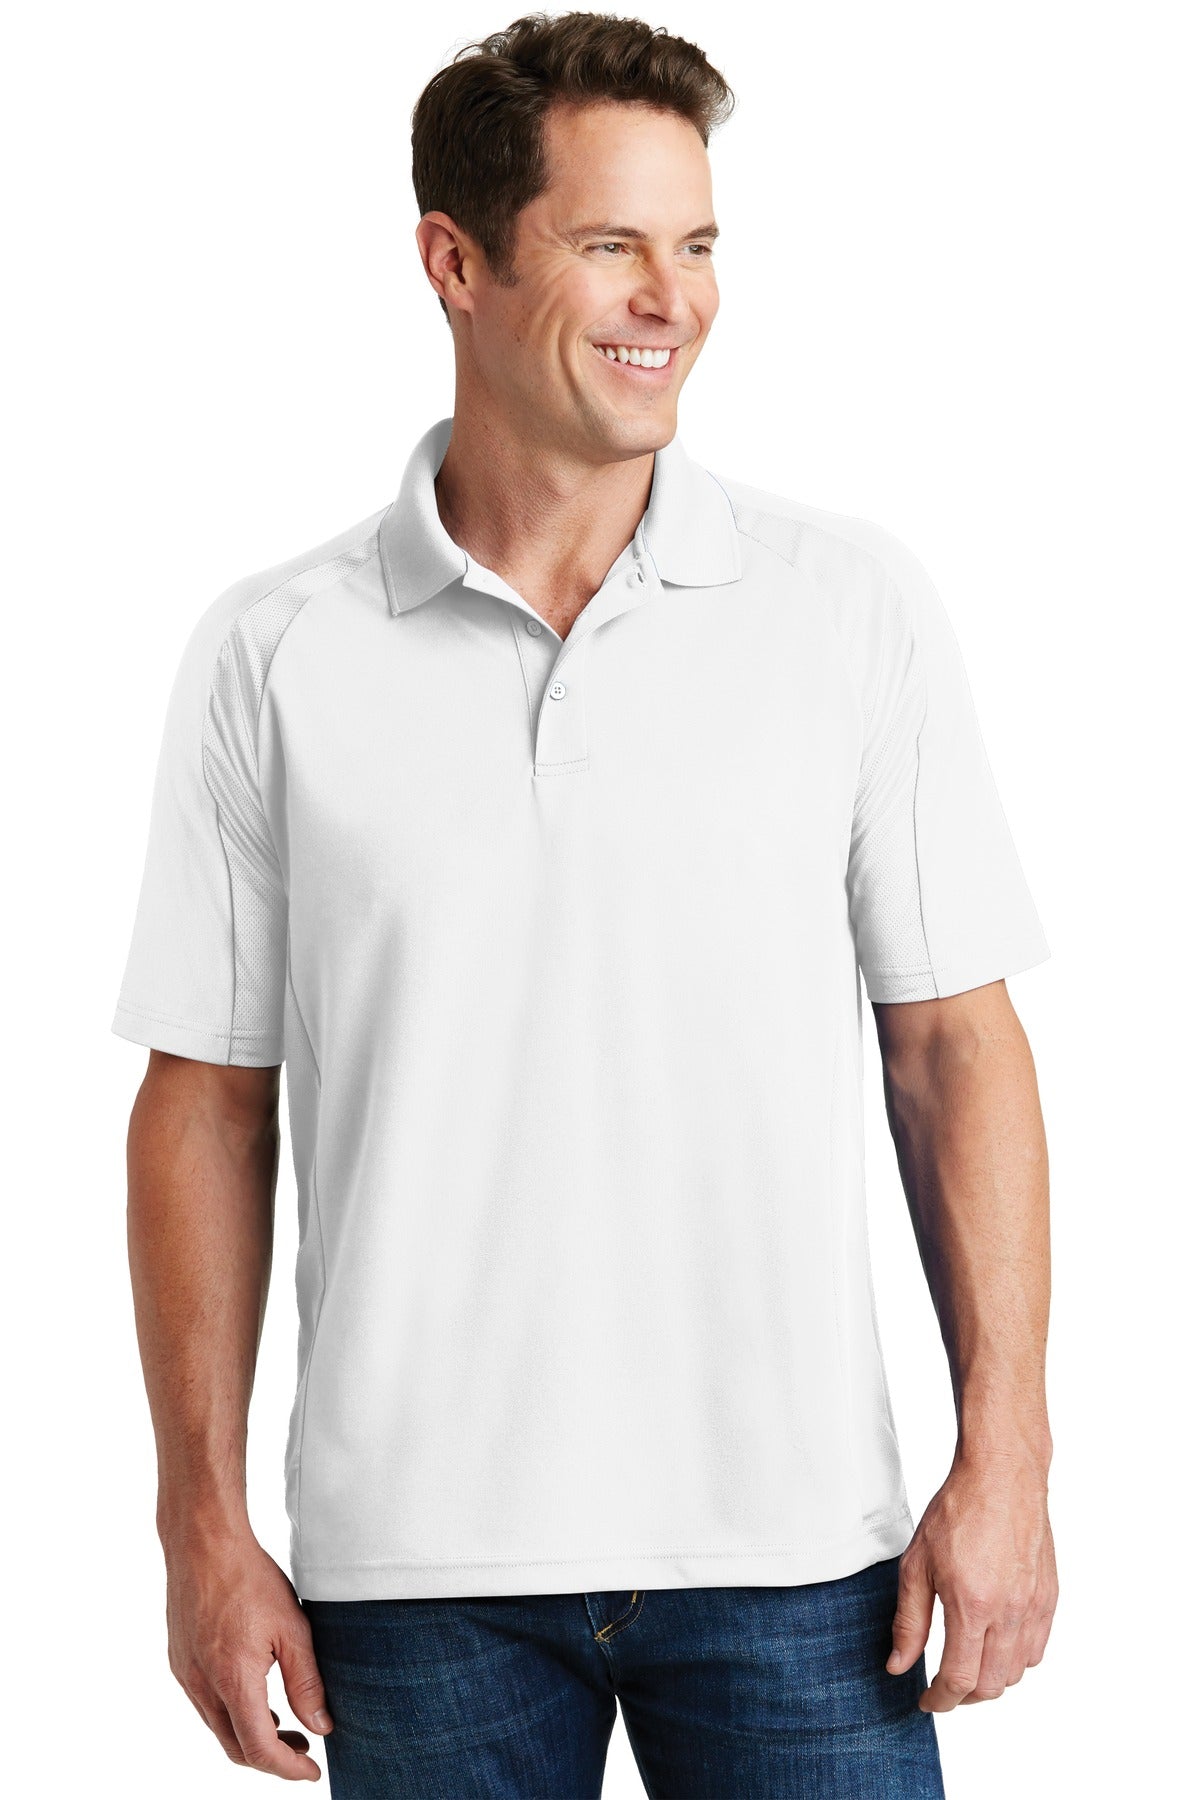 Photo of Sport-Tek Polos/Knits T474  color  White